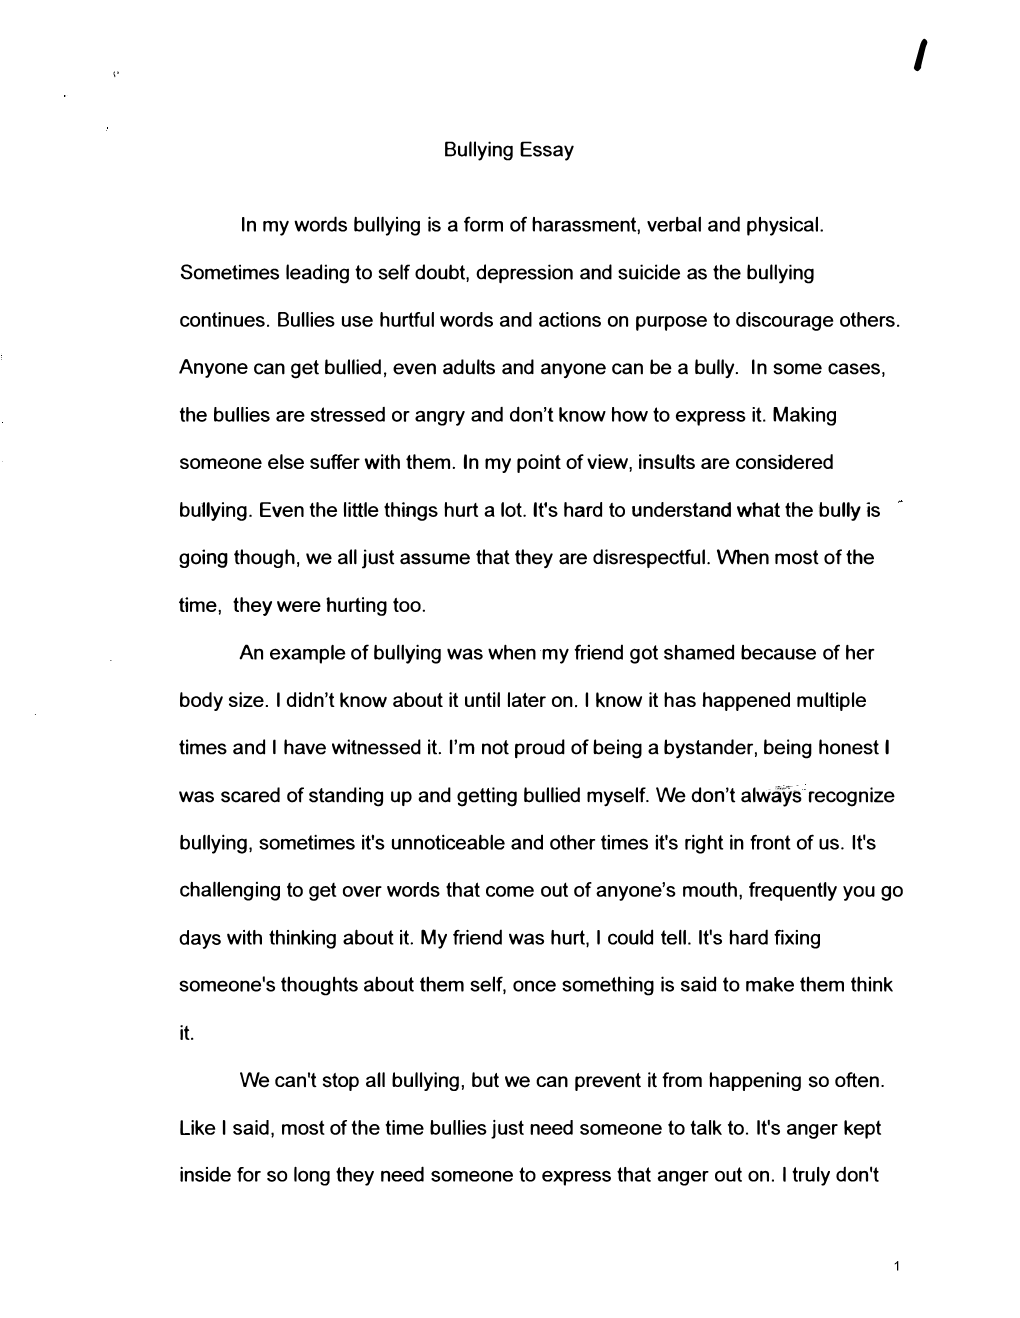 Bullying Essay in My Words Bullying Is a Form of Harassment, Verbal And